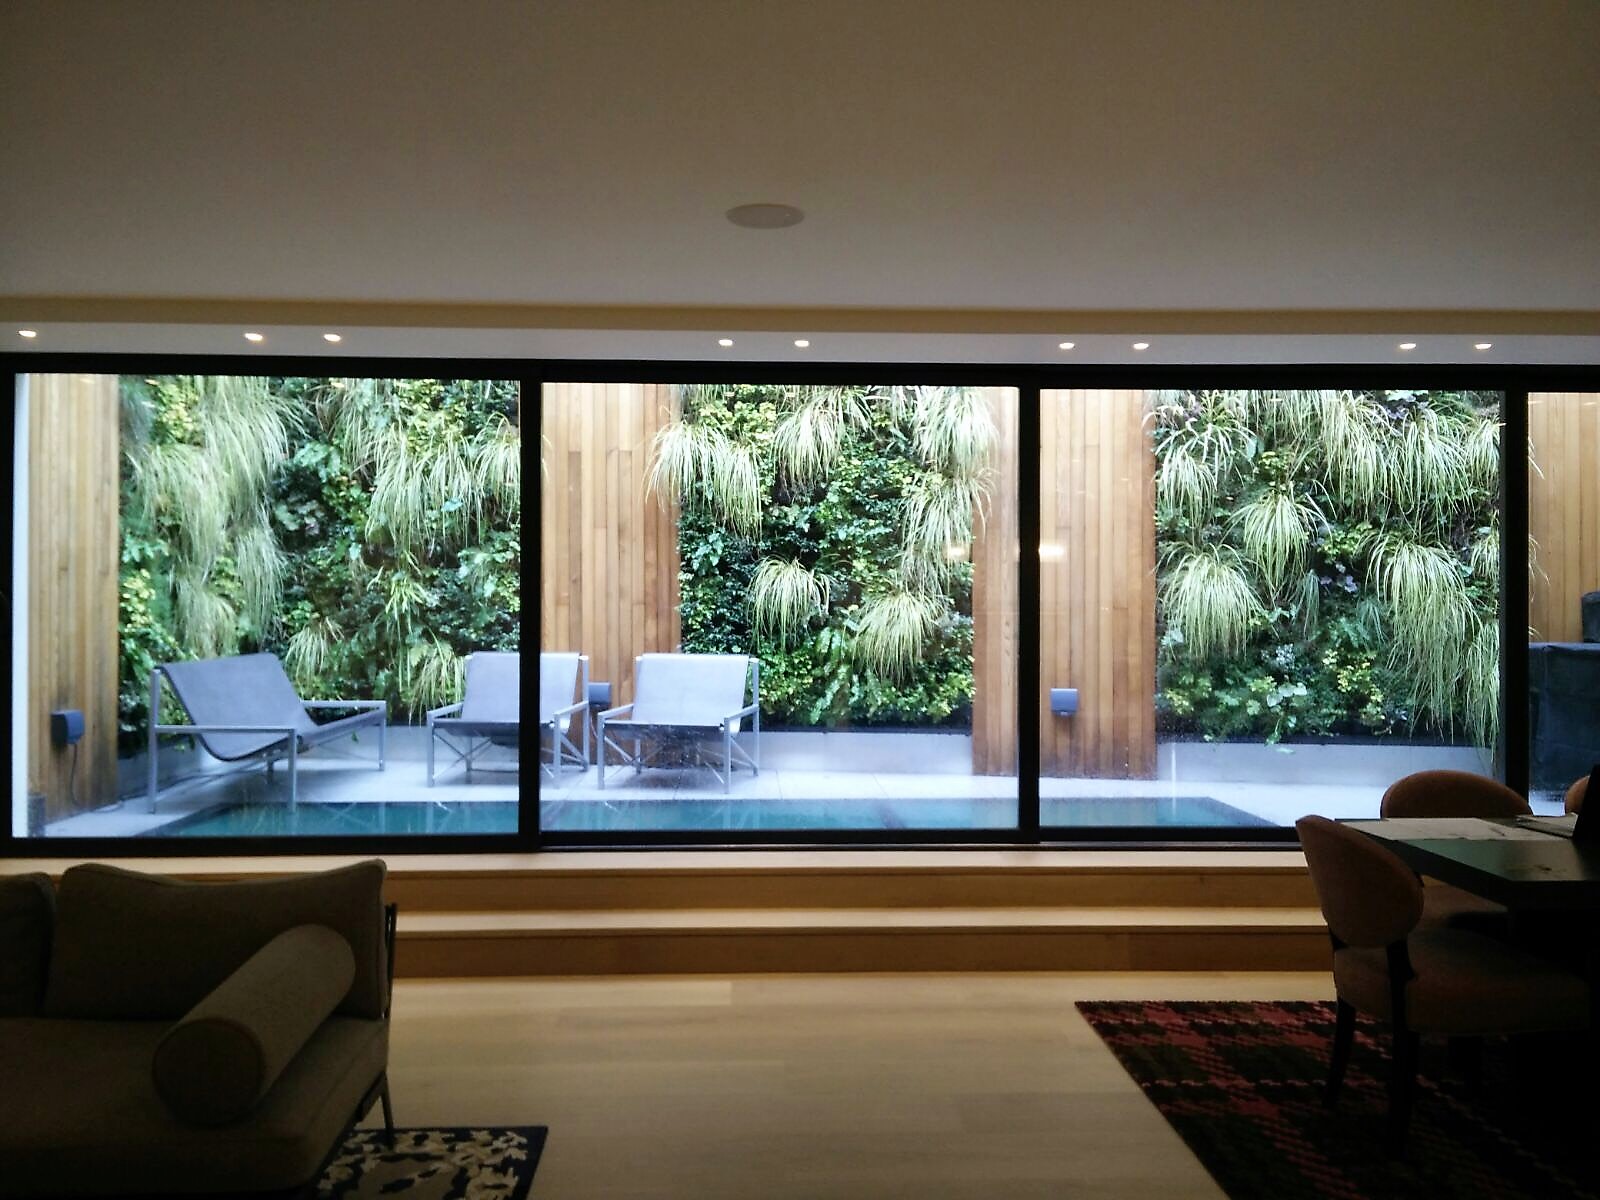 Why specify a living wall for your home or garden?